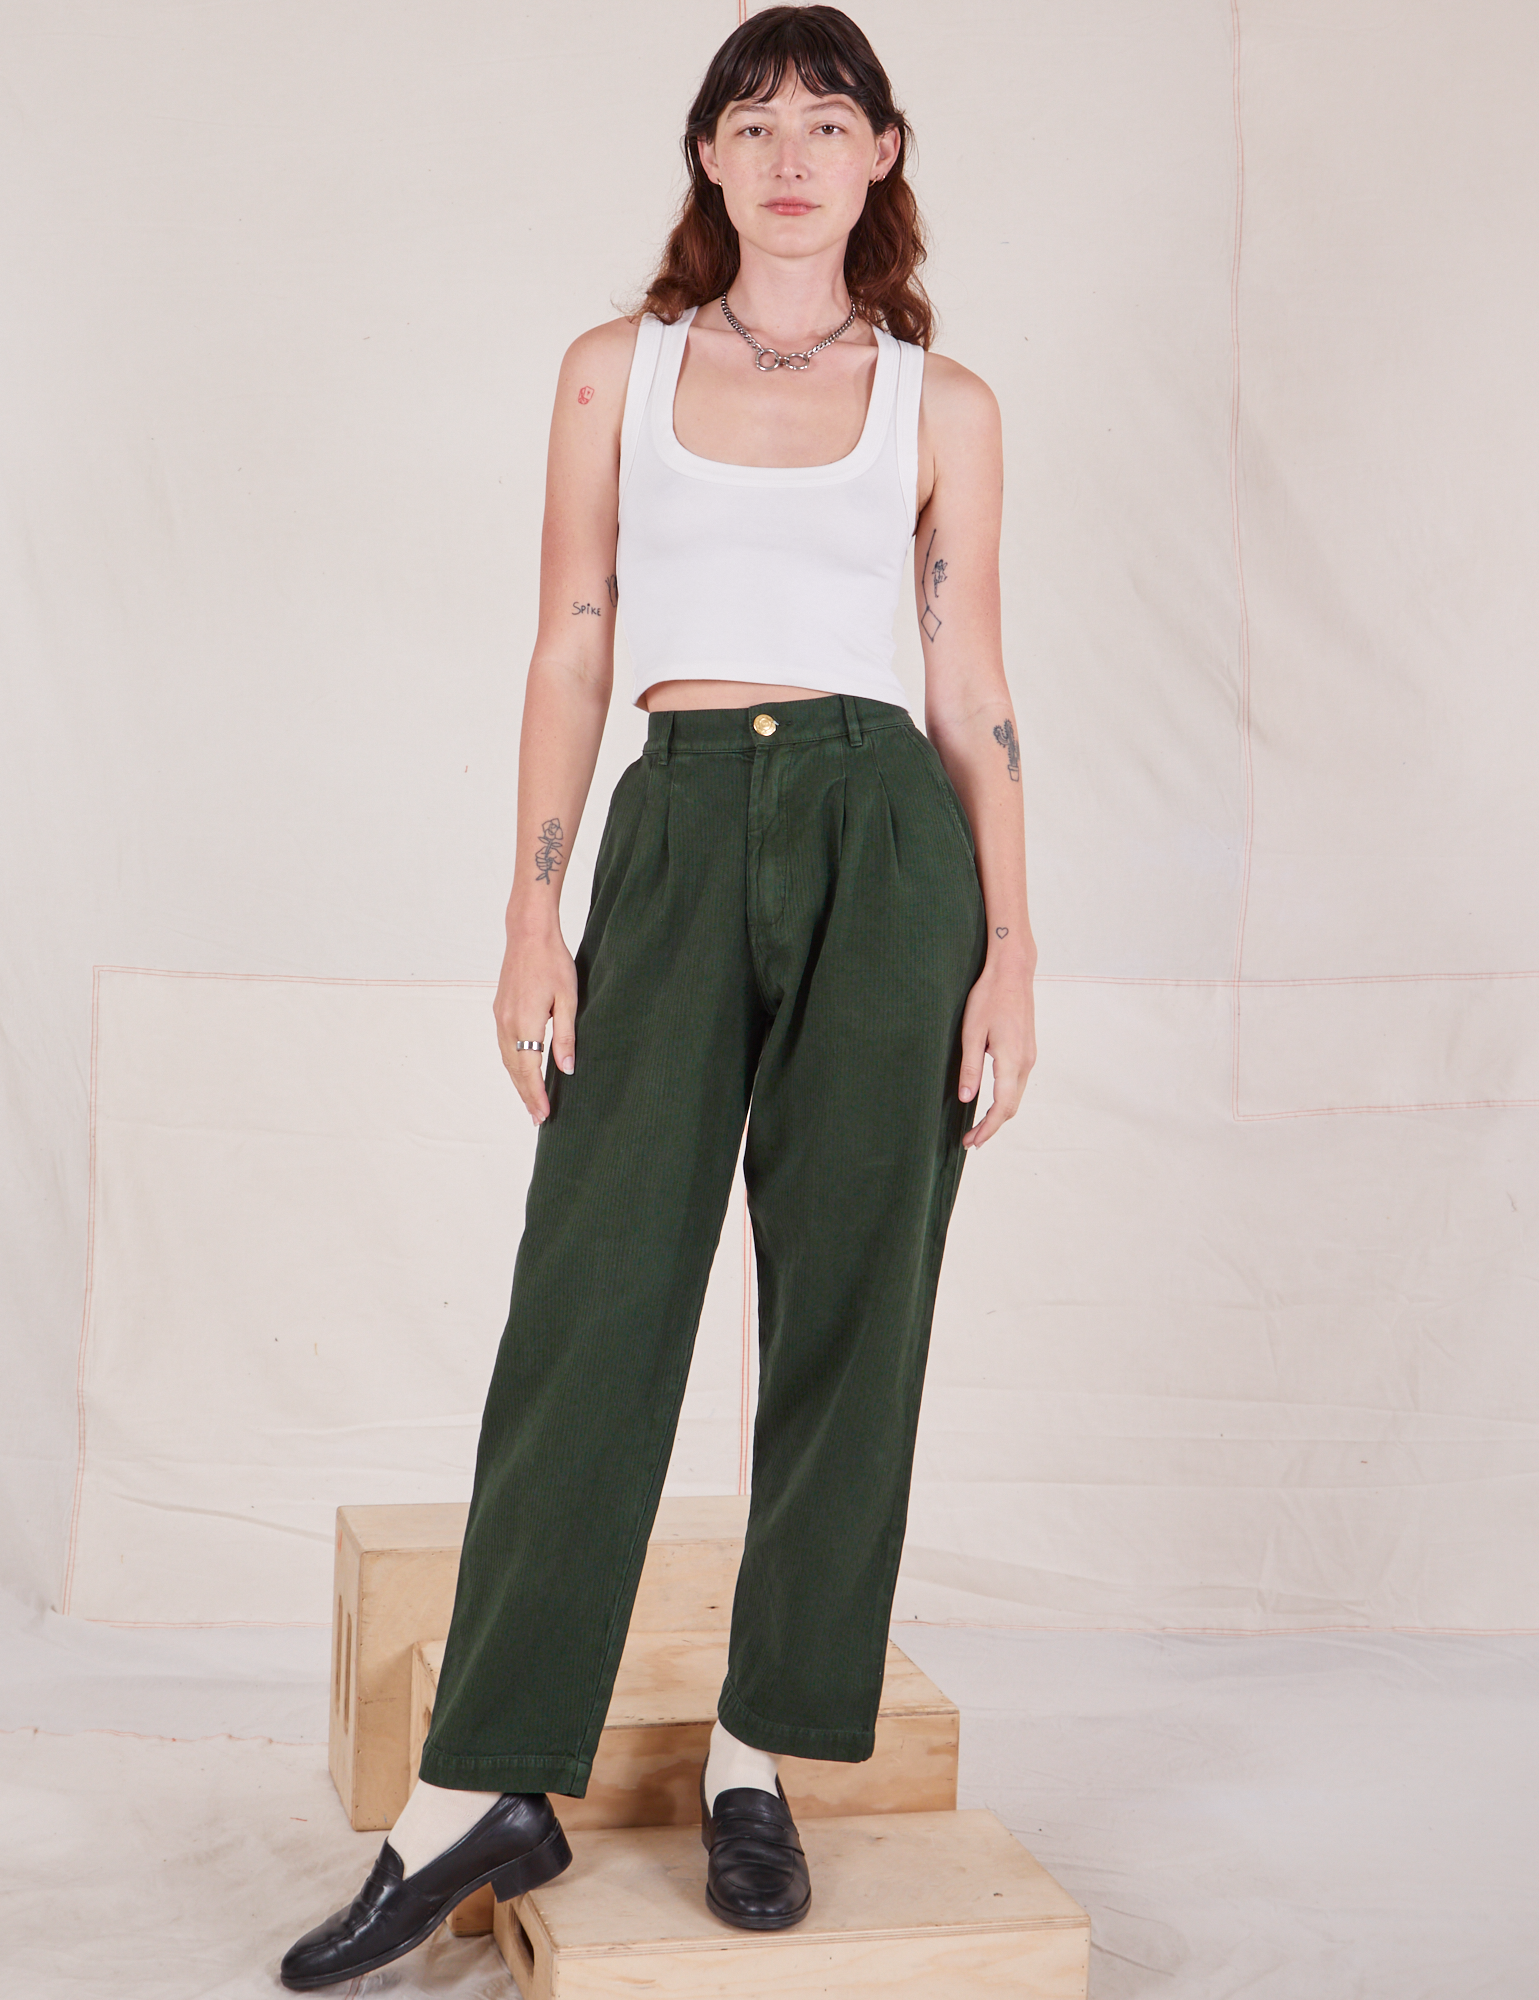 Alex is wearing Heritage Trousers in Swamp Green and Cropped Tank Top in vintage tee off-white